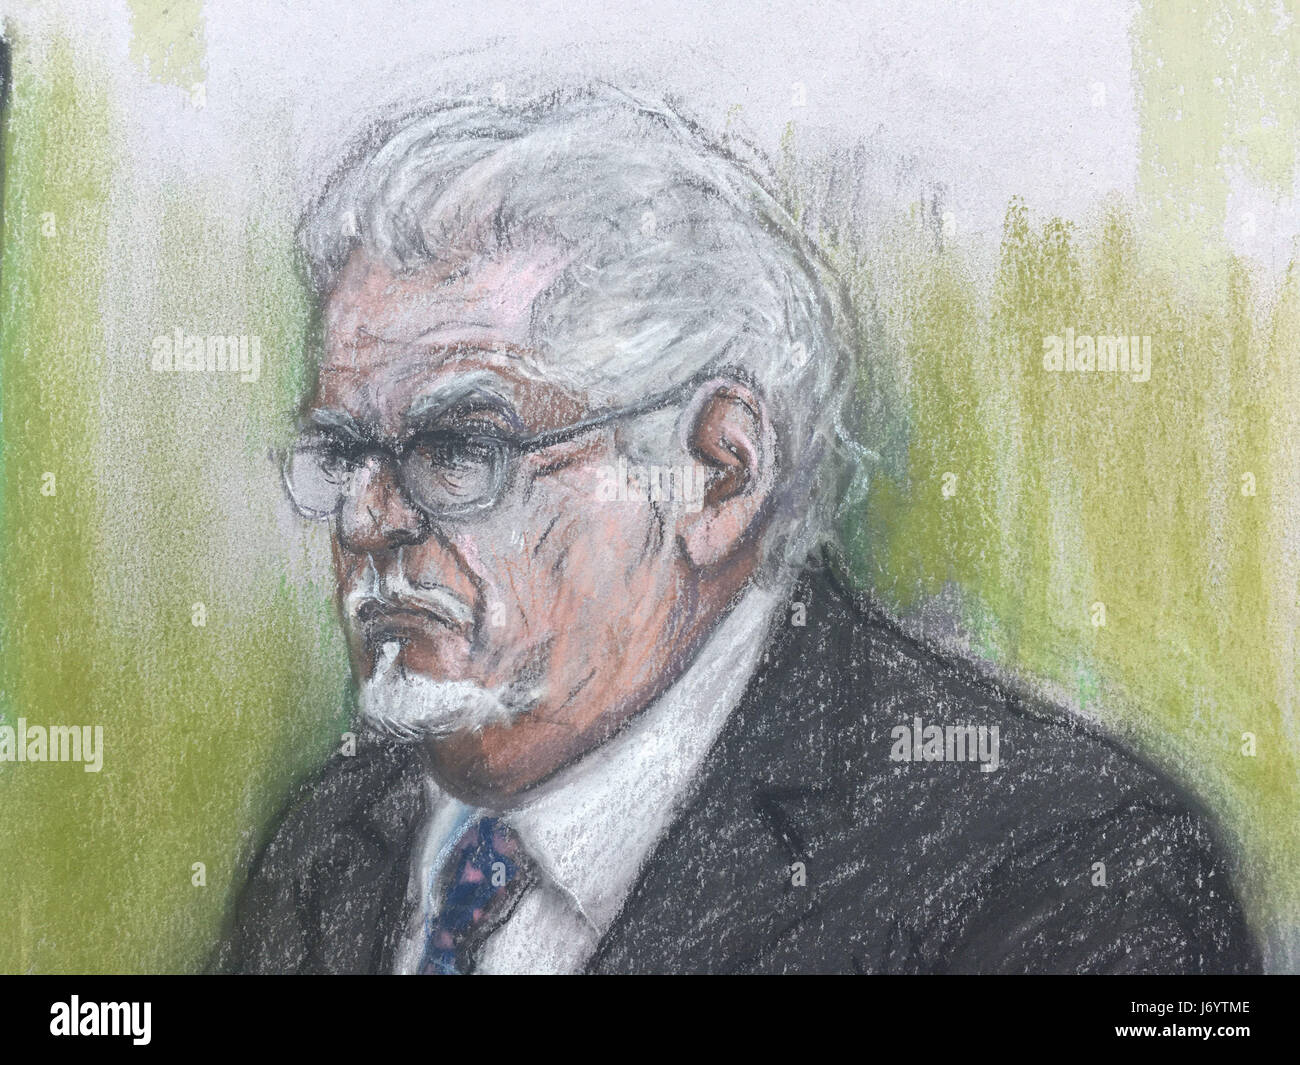 Court artist sketch by Elizabeth Cook of Rolf Harris, 87, in the dock at Southwark Crown Court in London, where he denies four counts of indecent assault relating to three teenagers who allege he molested them in the 1970s and 1980s. Stock Photo